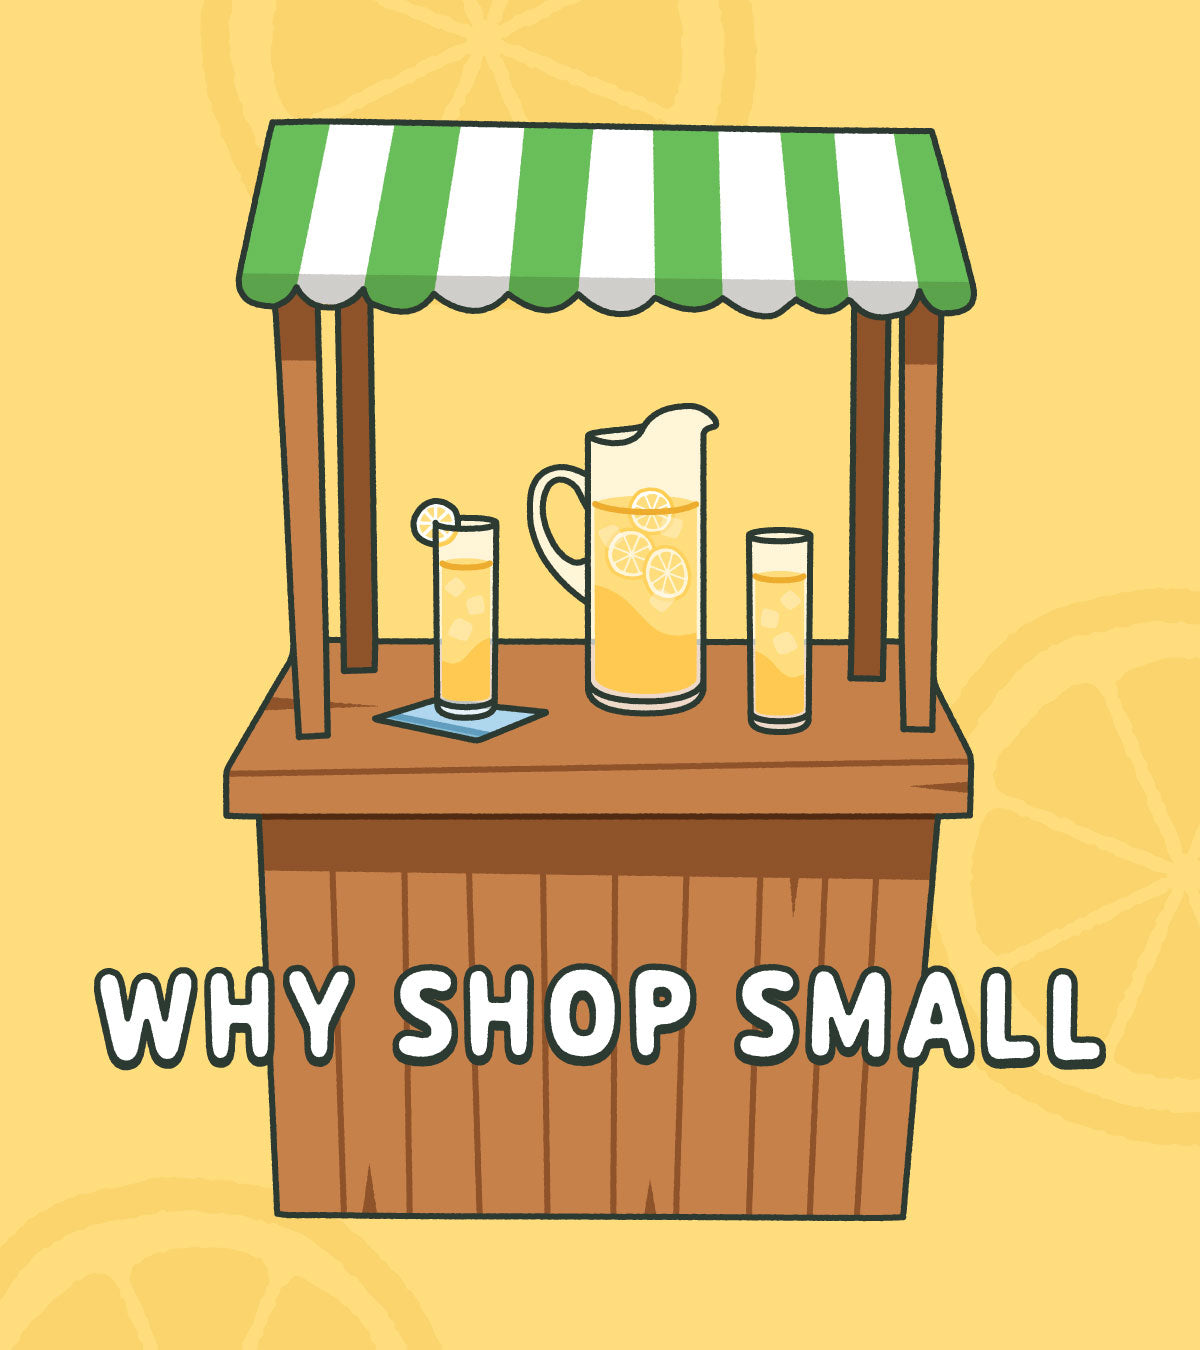 Illustrated lemonade stand with text "Why shop small"